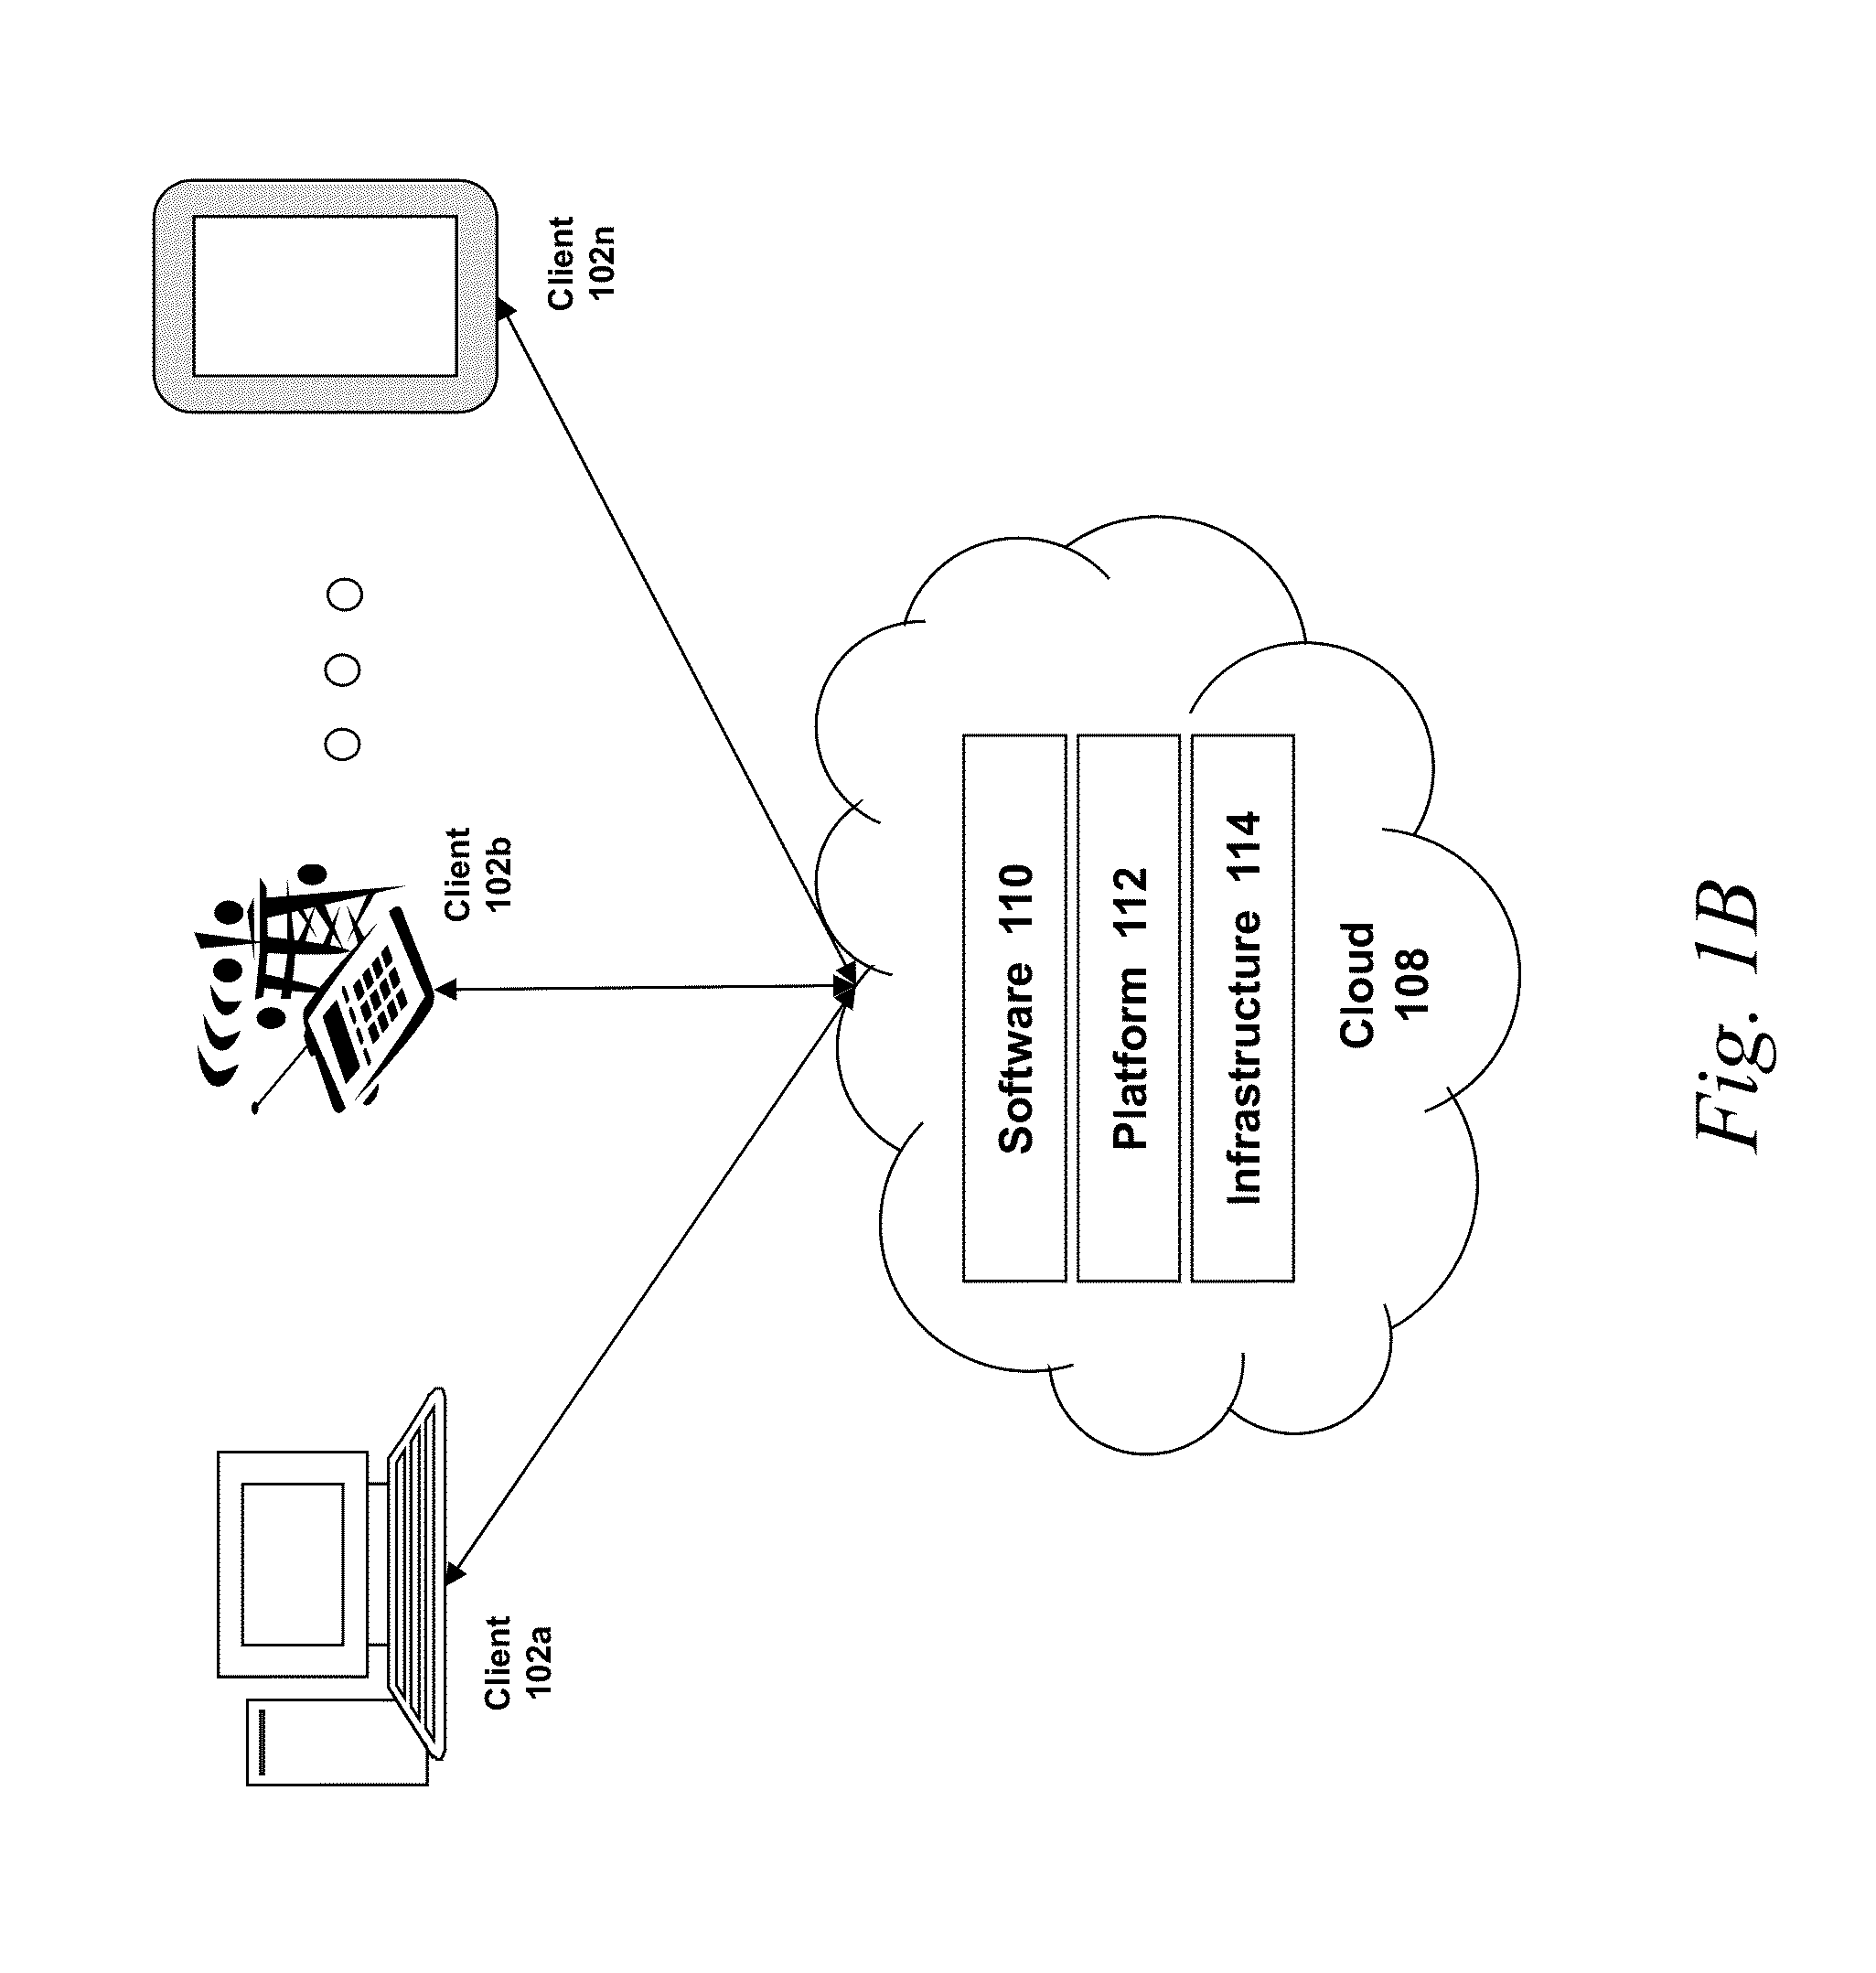 Systems and methods for self-tuning network intrusion detection and prevention